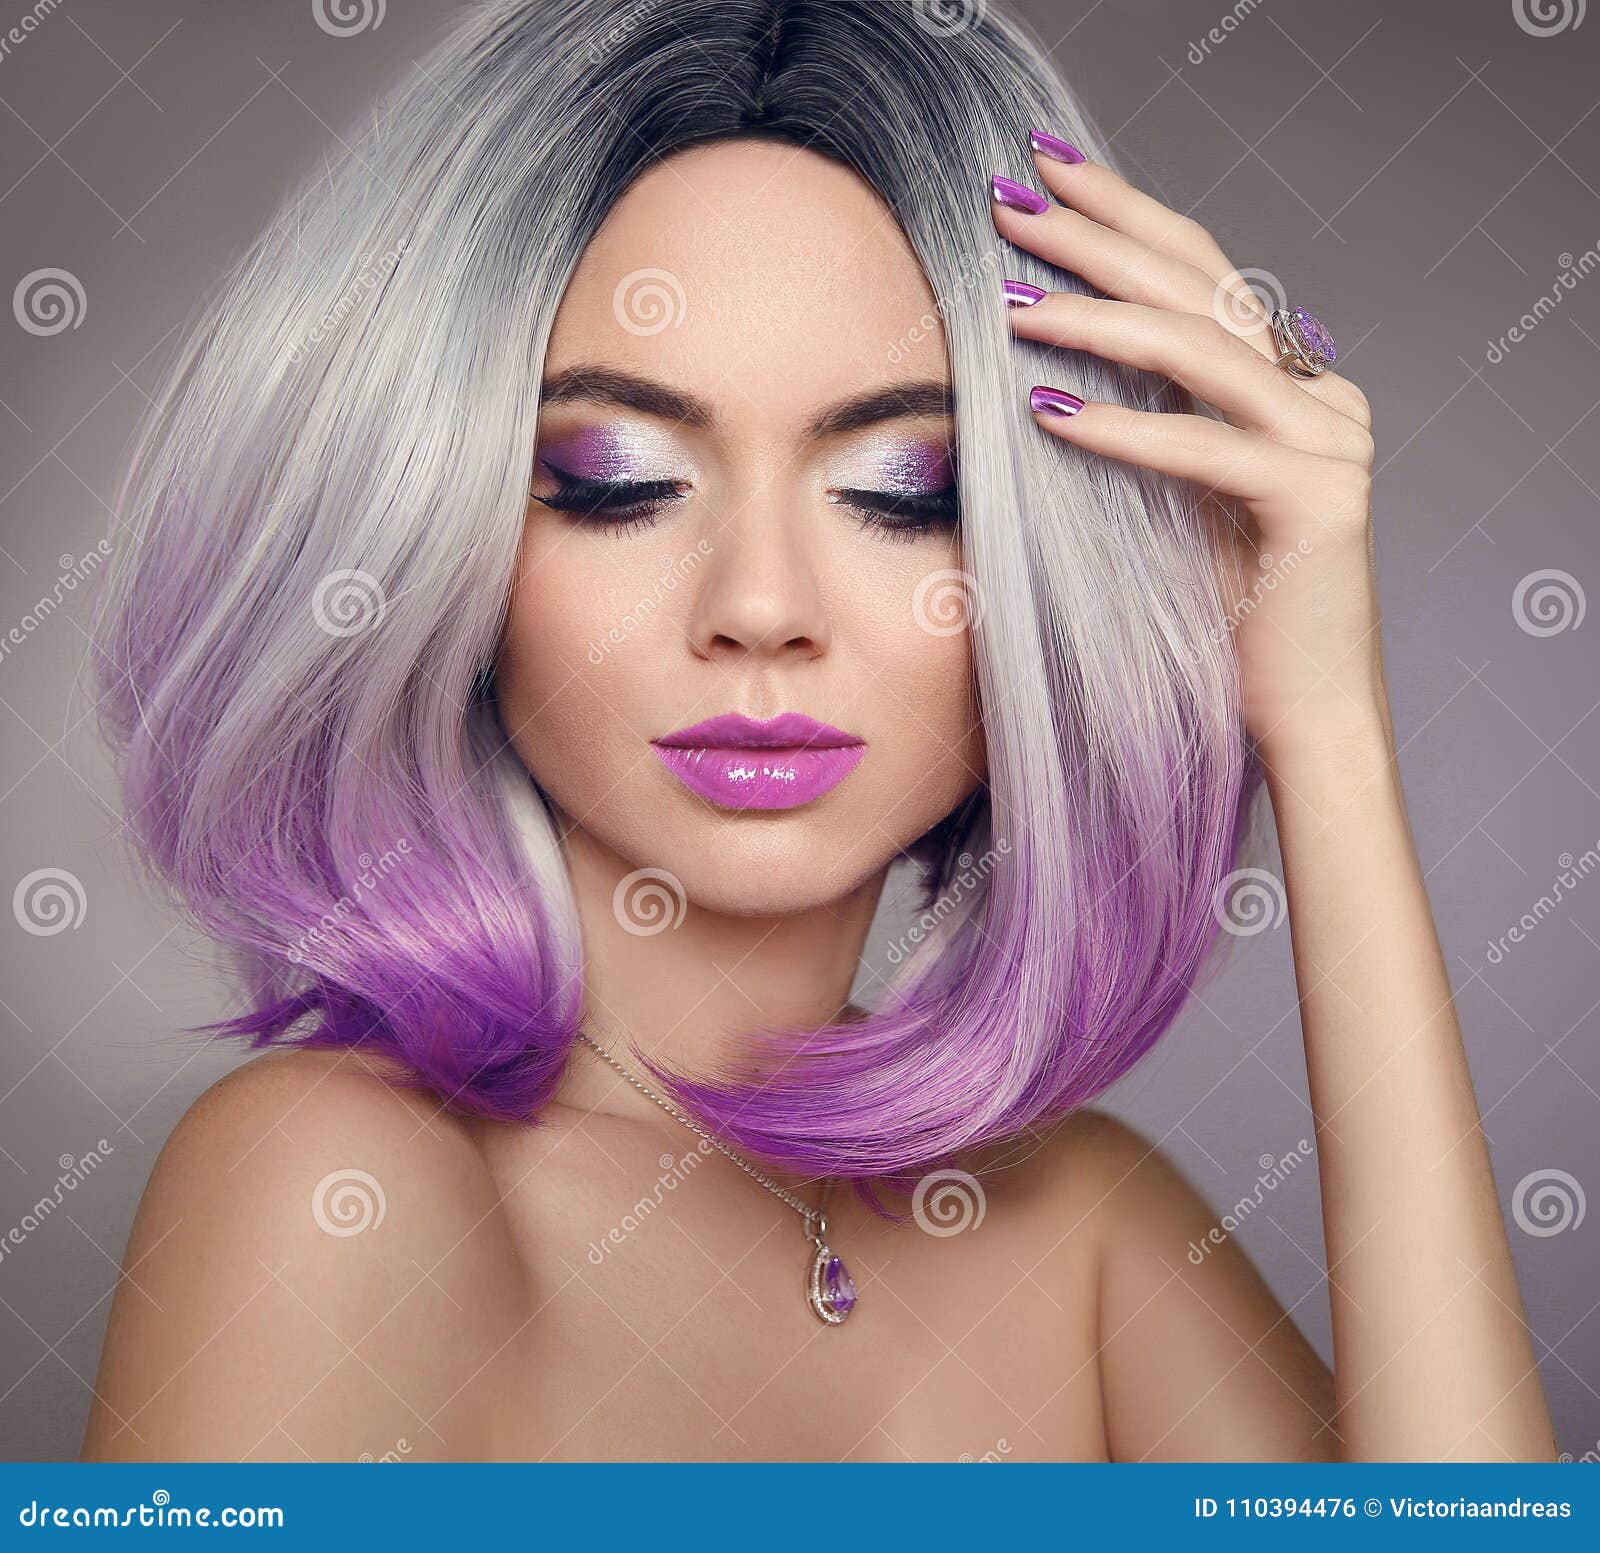 ombre bob hair coloring woman. beauty portrait of blond model wi